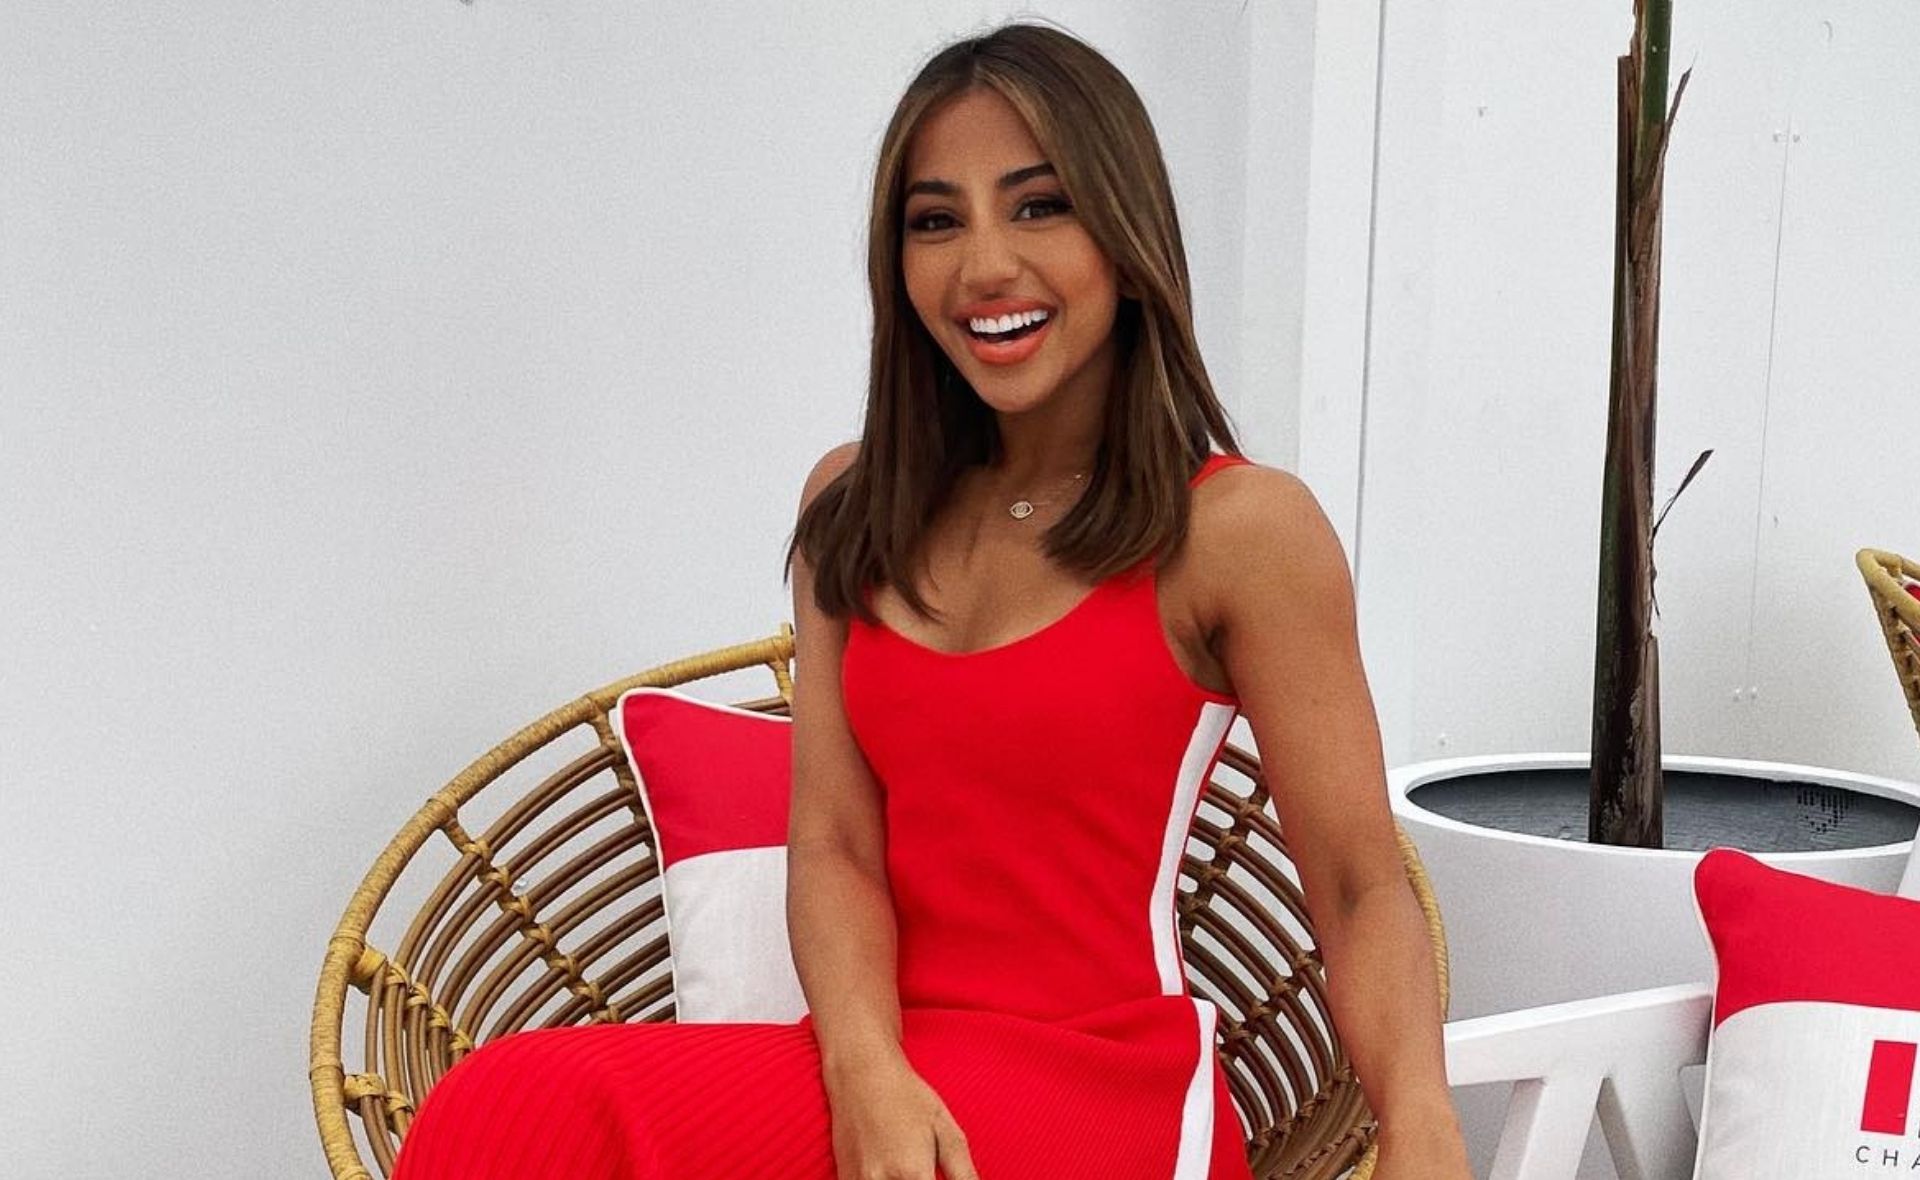 EXCLUSIVE: I’m A Celebrity… Get Me Out of Here’s Maria Thattil is considering adding ‘politician’ to her already lengthy resume